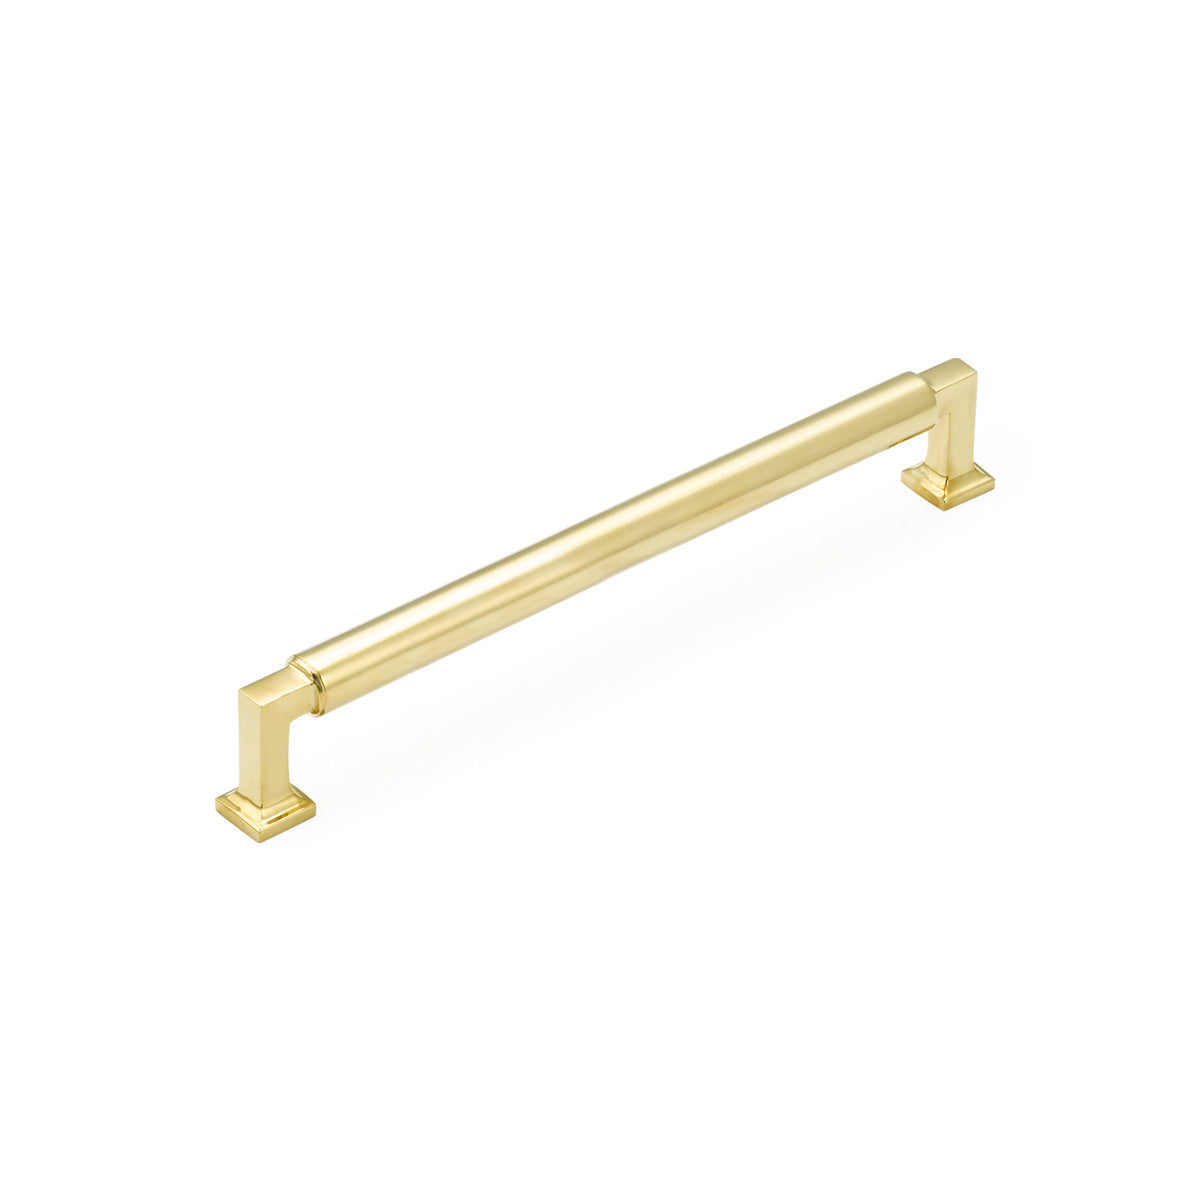 Unlacquered Brass "Neal" Cabinet Knobs and Pulls Cabinet Hardware - Brass Cabinet Hardware 